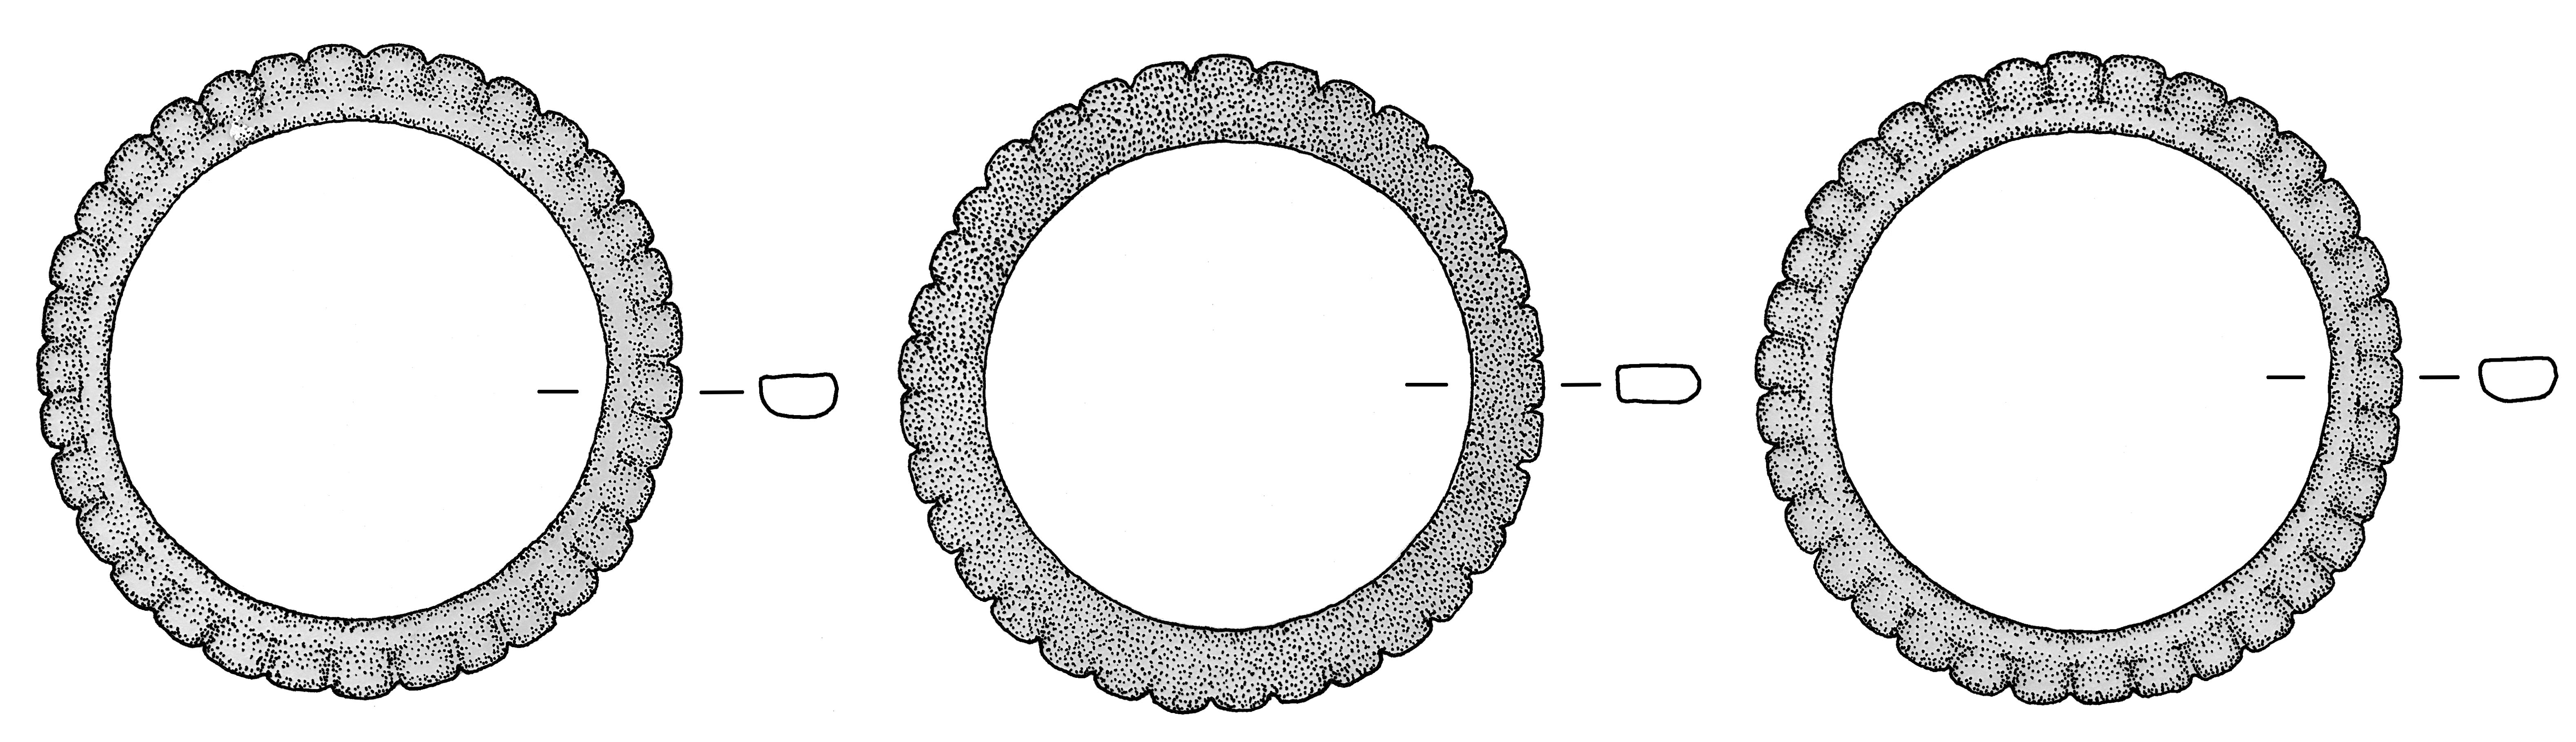 BC 0708C/1594<br>outer diameter=6.8 cm
inner diameter=5.1 cm
shaft height=0.4 cm
shaft width=0.8 cm
scalloped edges
Object is one of three rings: one ring has flat top and bottom surfaces, two rings have one flat and one convex surface, allowing the rings to fit together as a set. Knobs are 0.5 cm. 